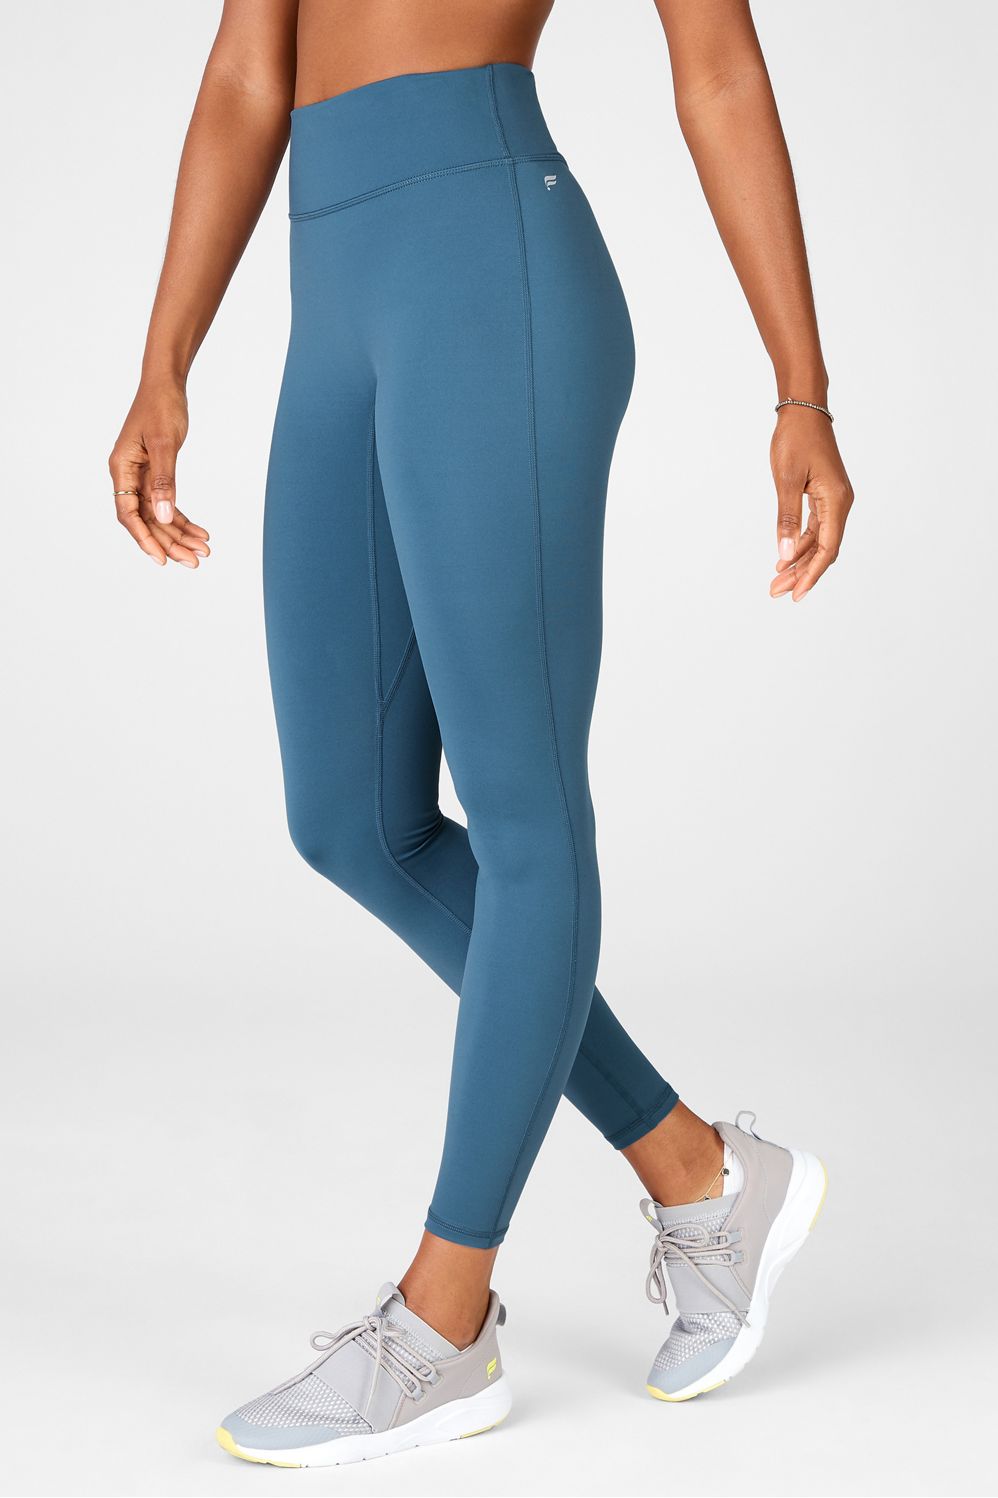 Fabletics High-Waisted Motion365 Pocket 7/8 Leggings NWT Size L